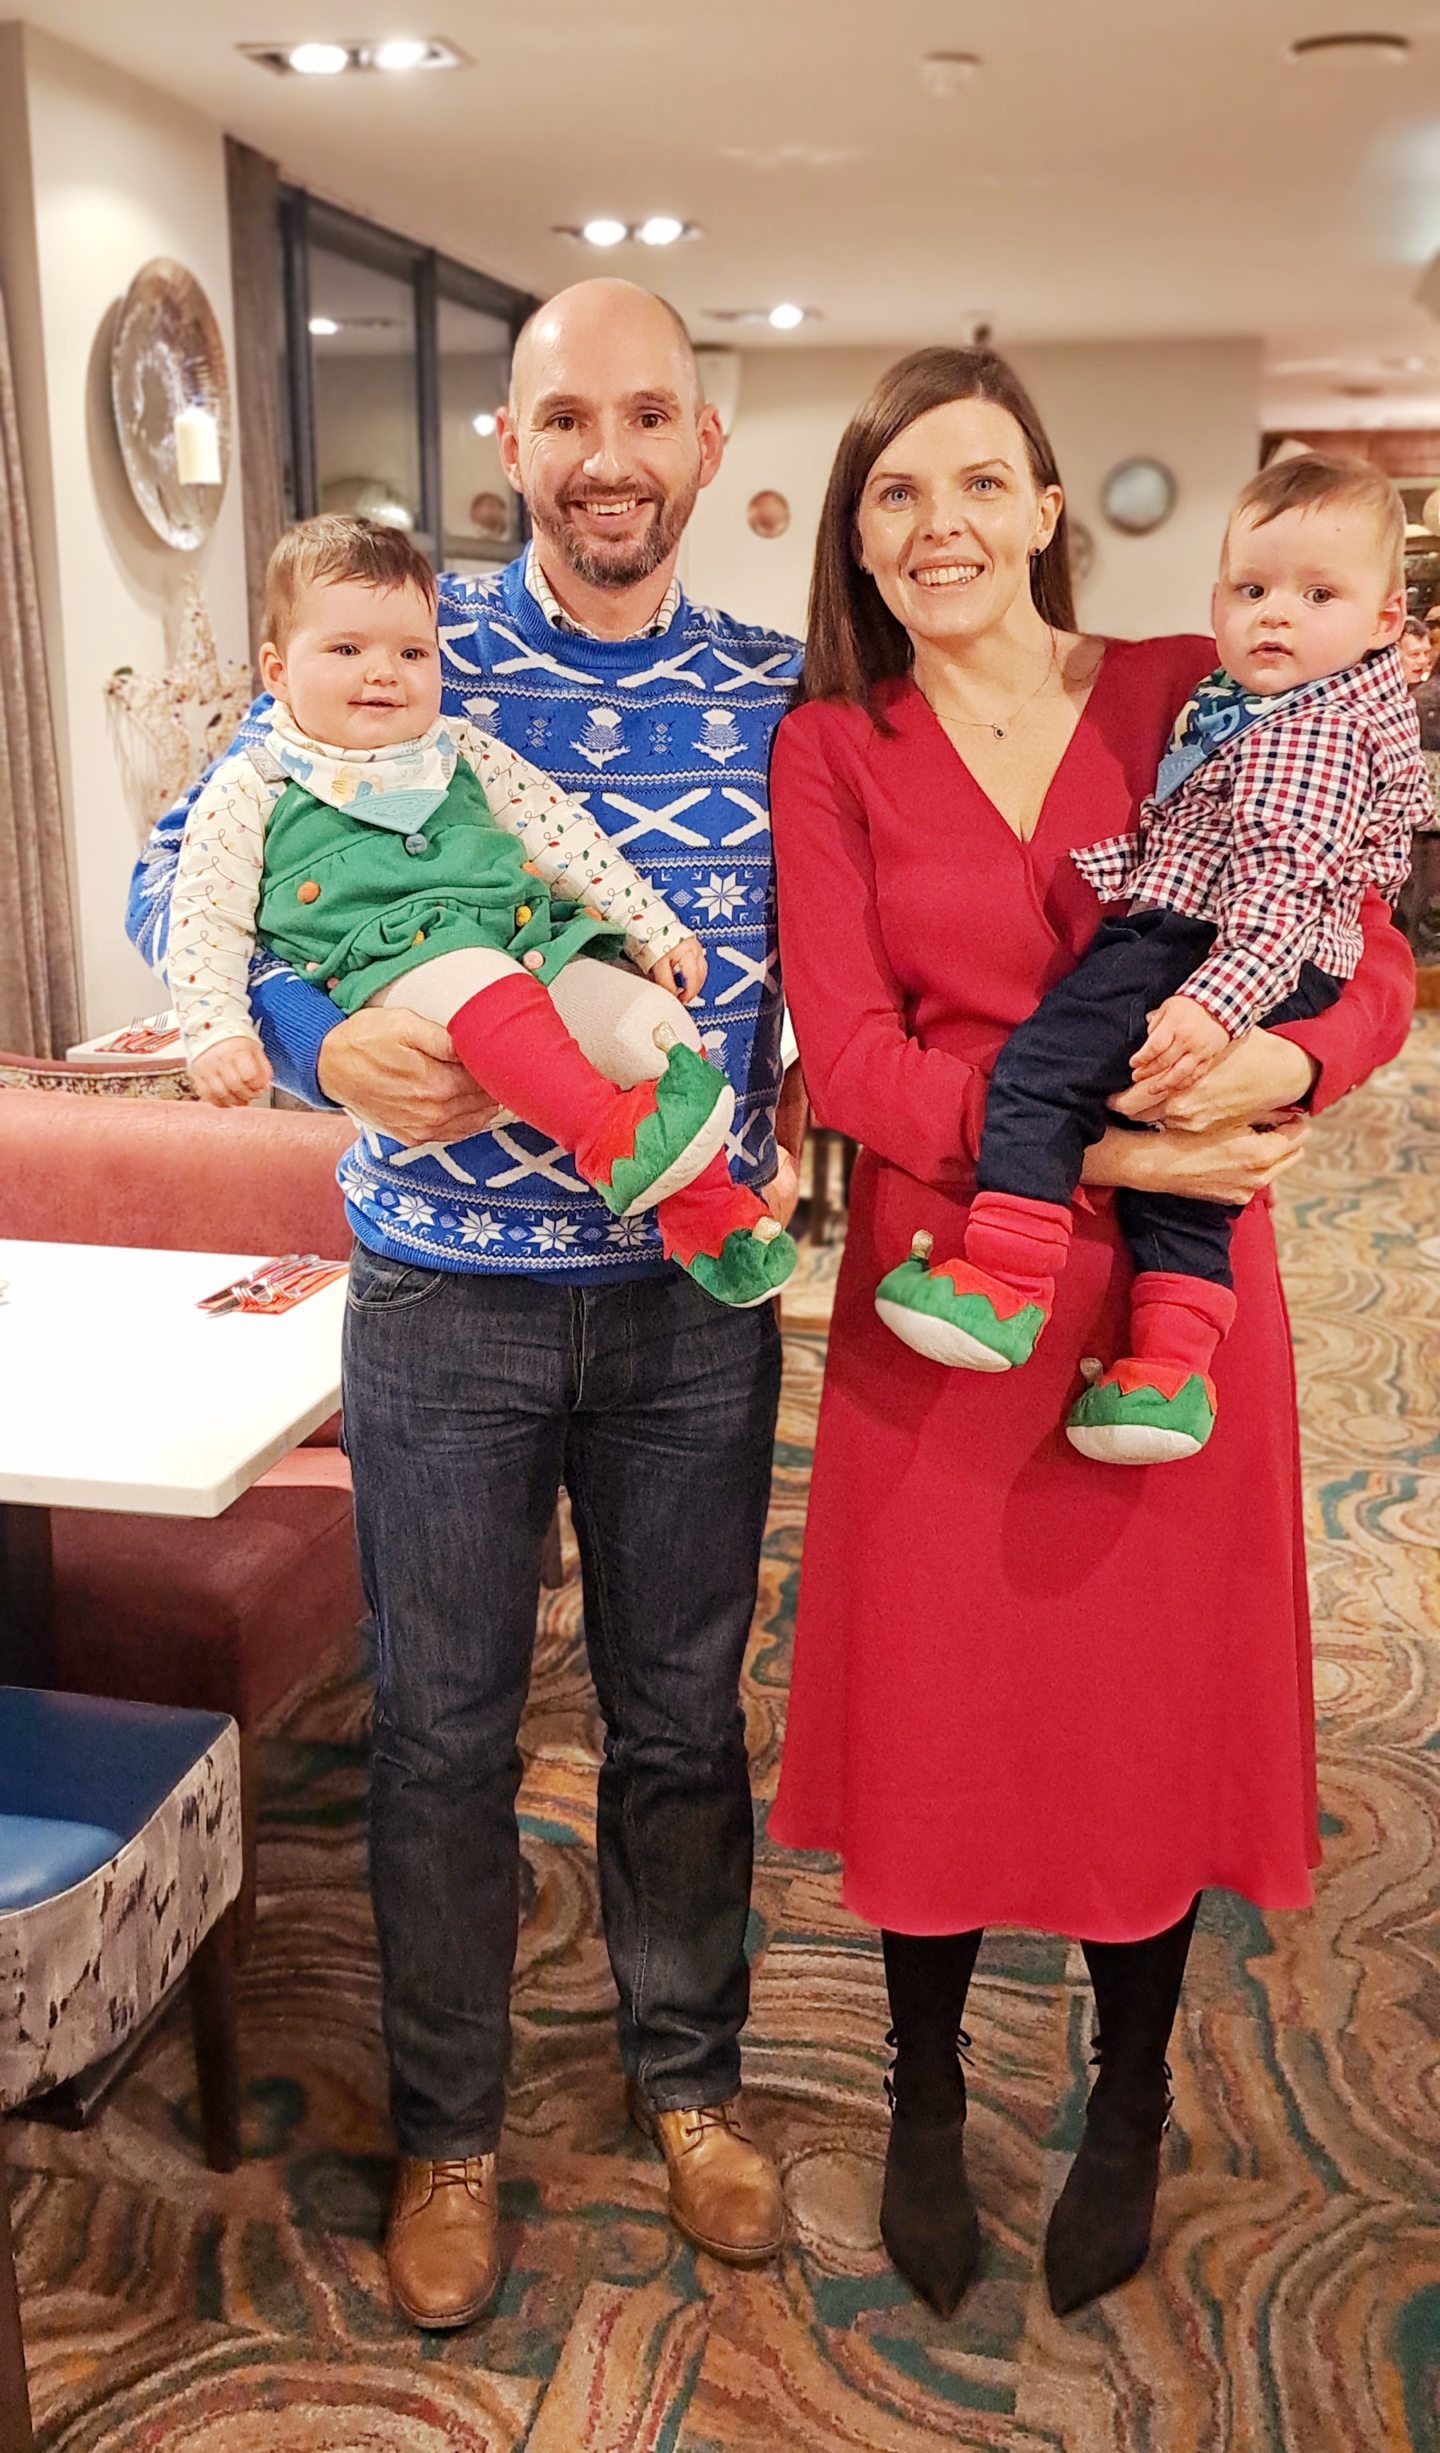 Marie and Roy Potts with their one-year-old twins Emily and Ruaridh.